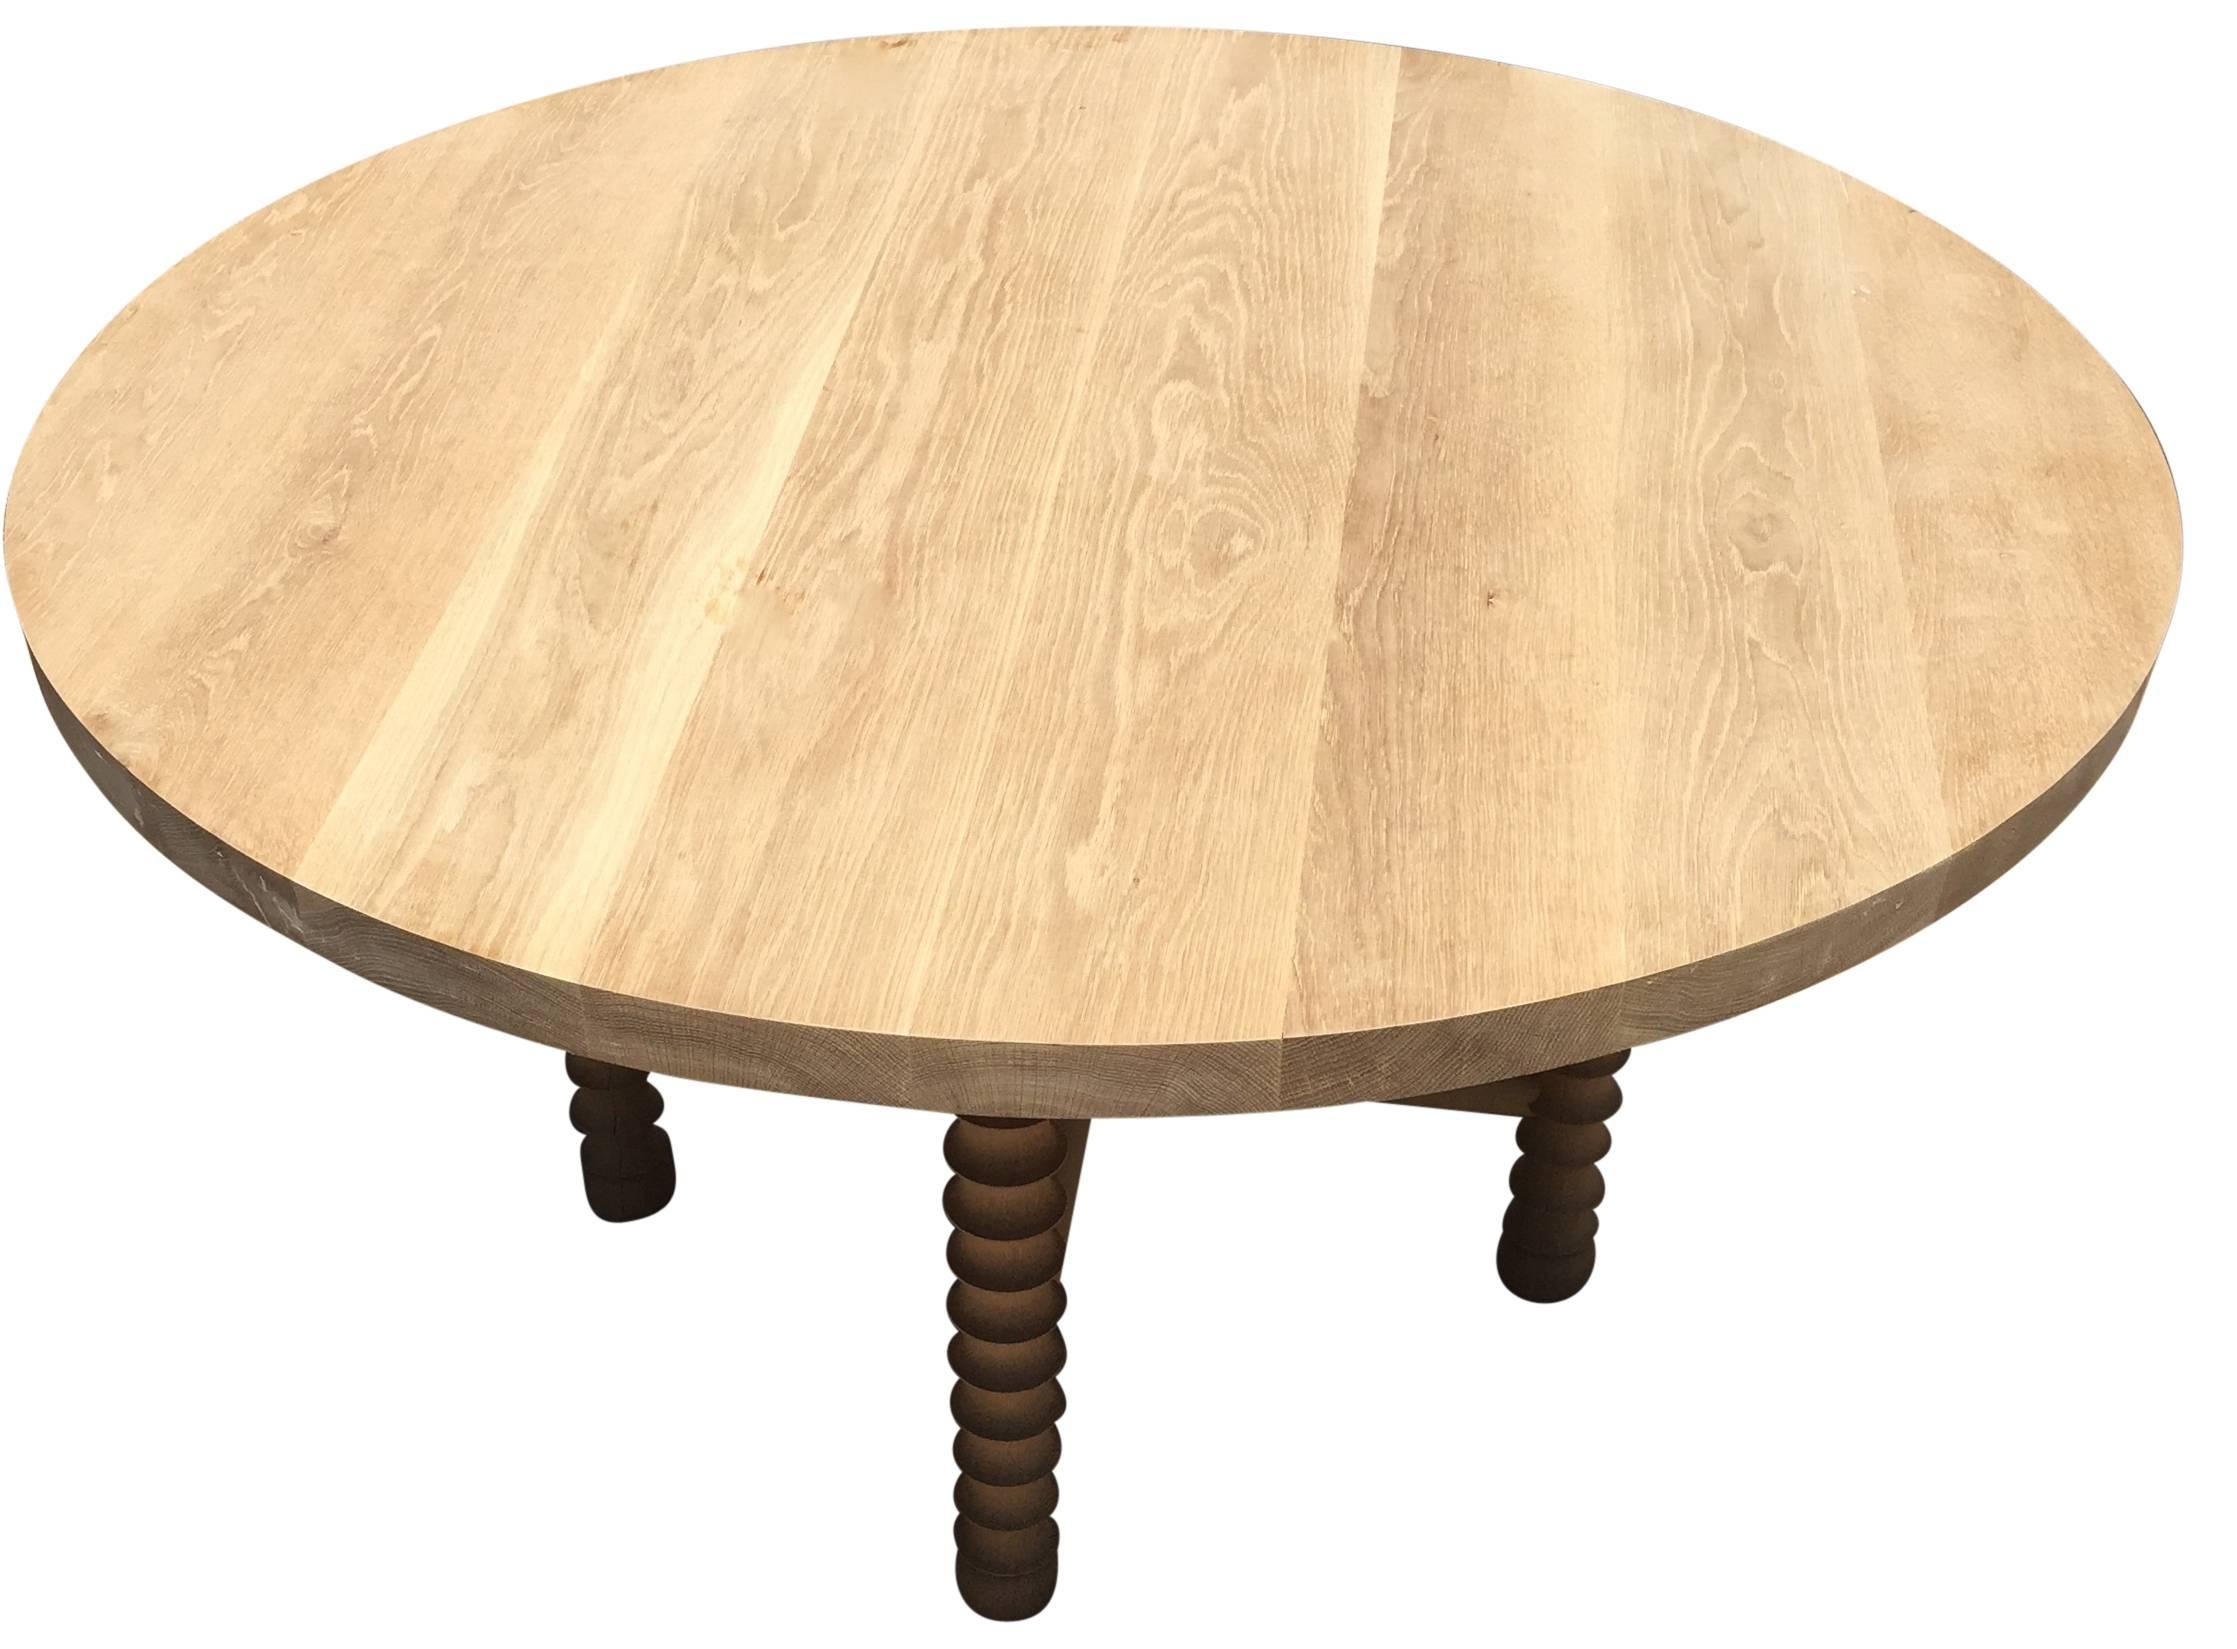 The Ojai dining table melds contemporary and transitional design elements. Shown in white oak, it is also available in walnut and alder. It is also available in a charcoal, Black and dark brown finish. Custom sizes available with a six-ten weeks